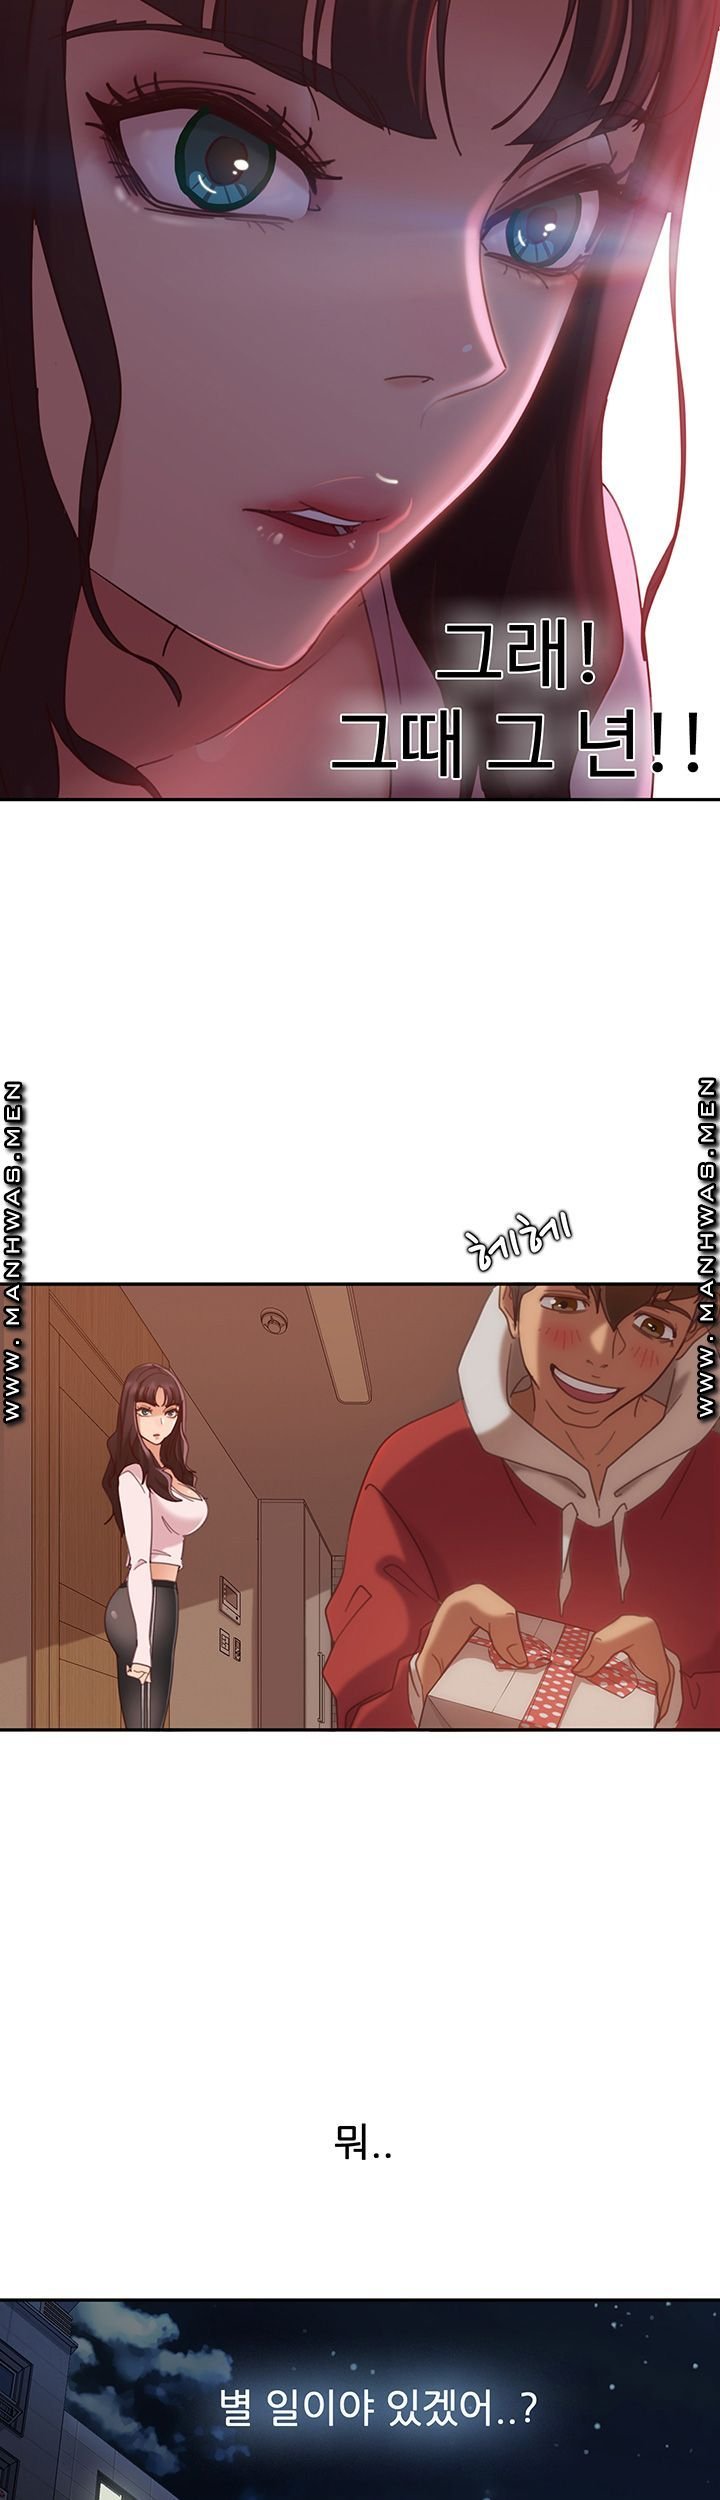 a-twisted-day-raw-chap-3-29